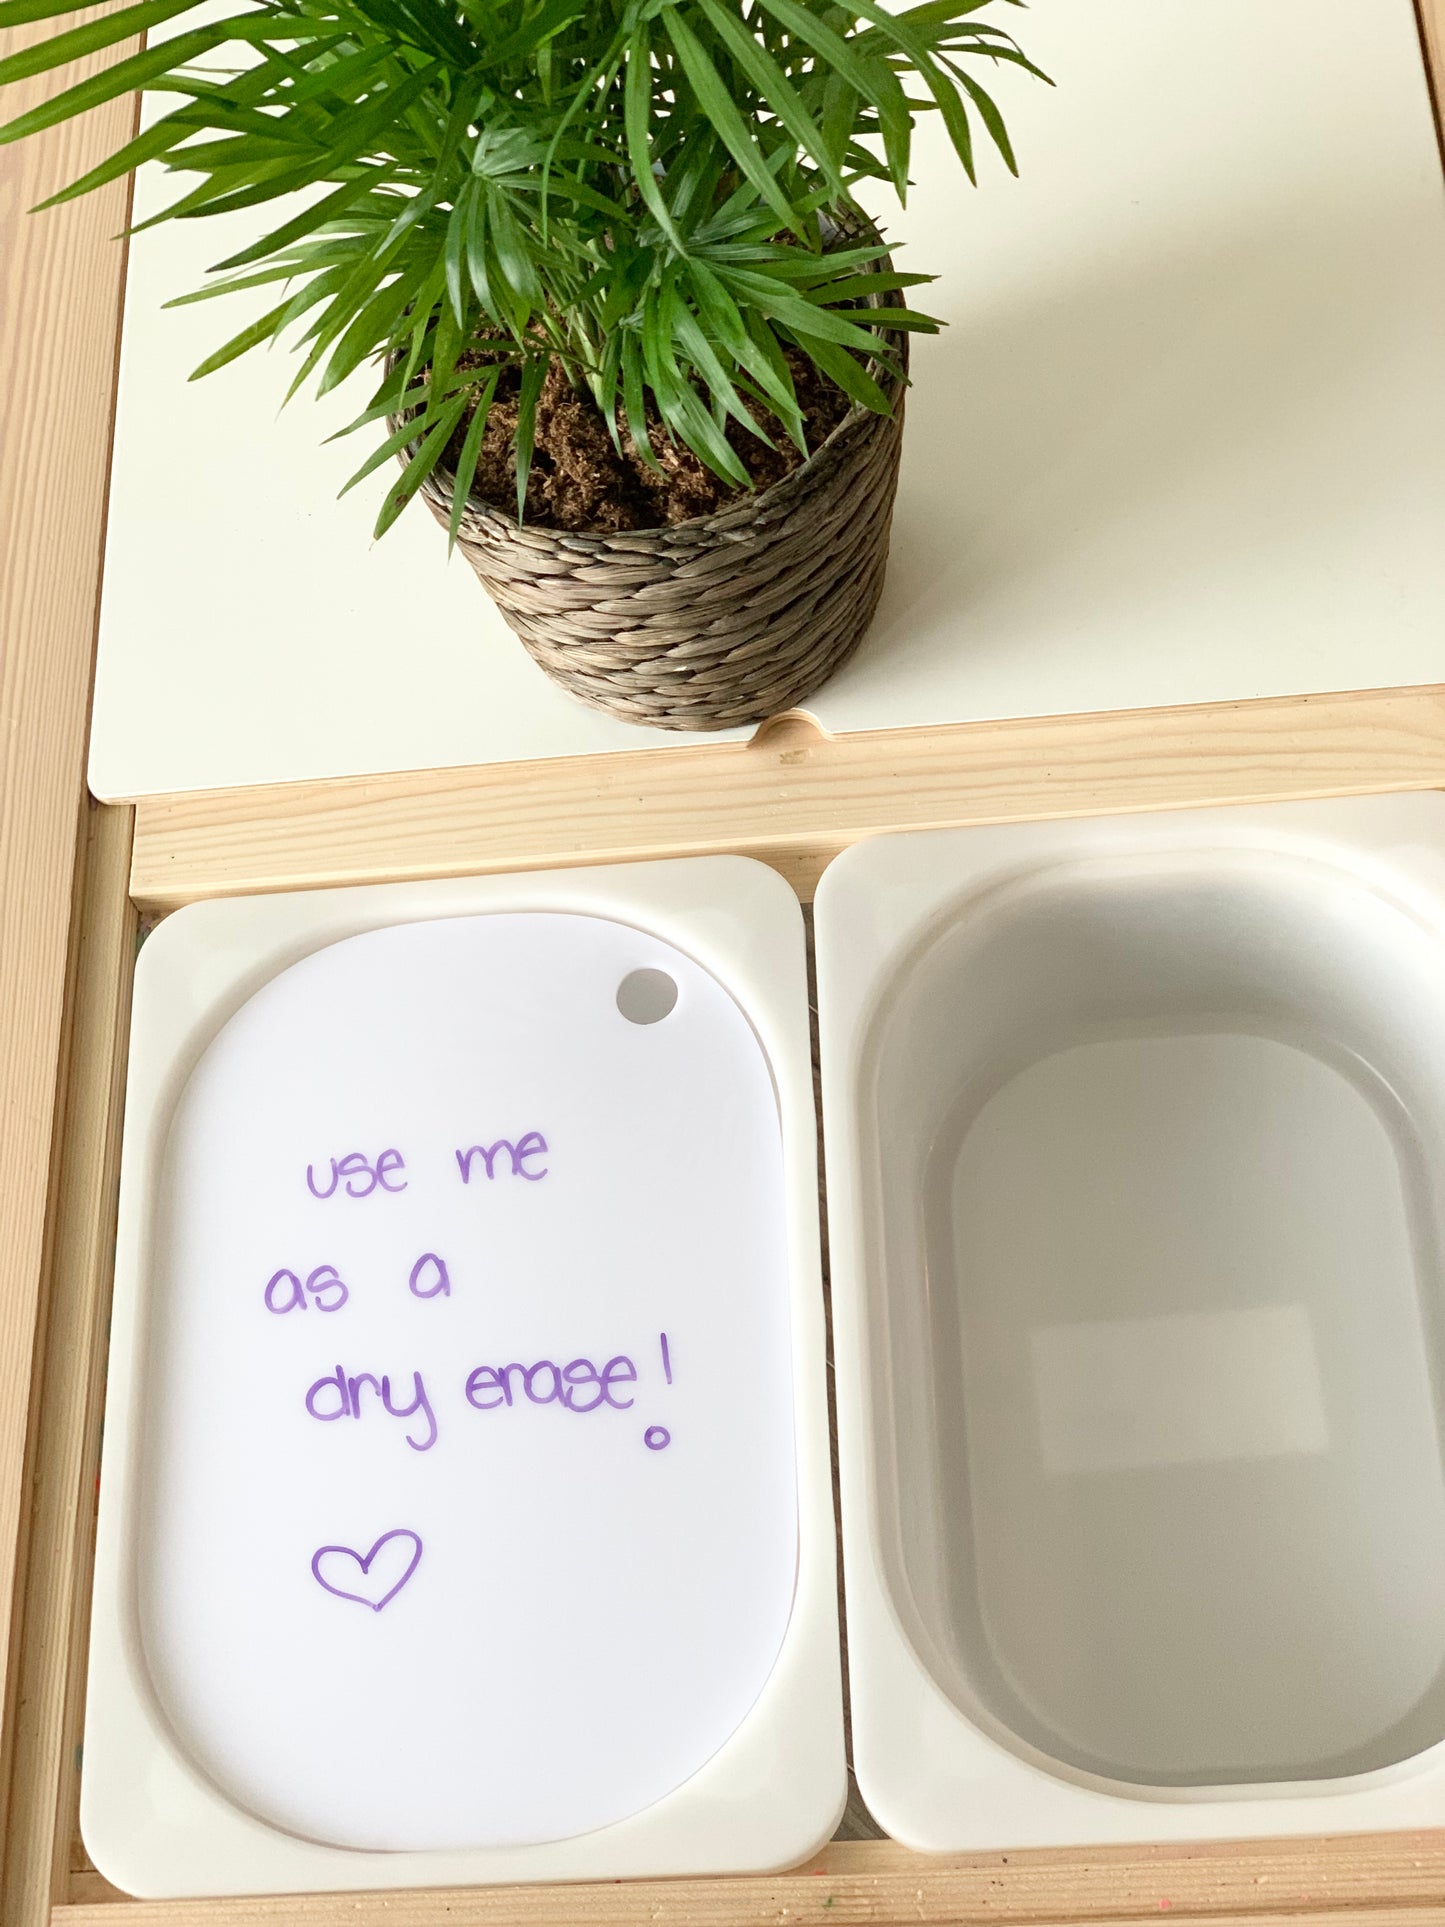 White Acrylic Flisat Table Bin Lid - can be used as dry erase